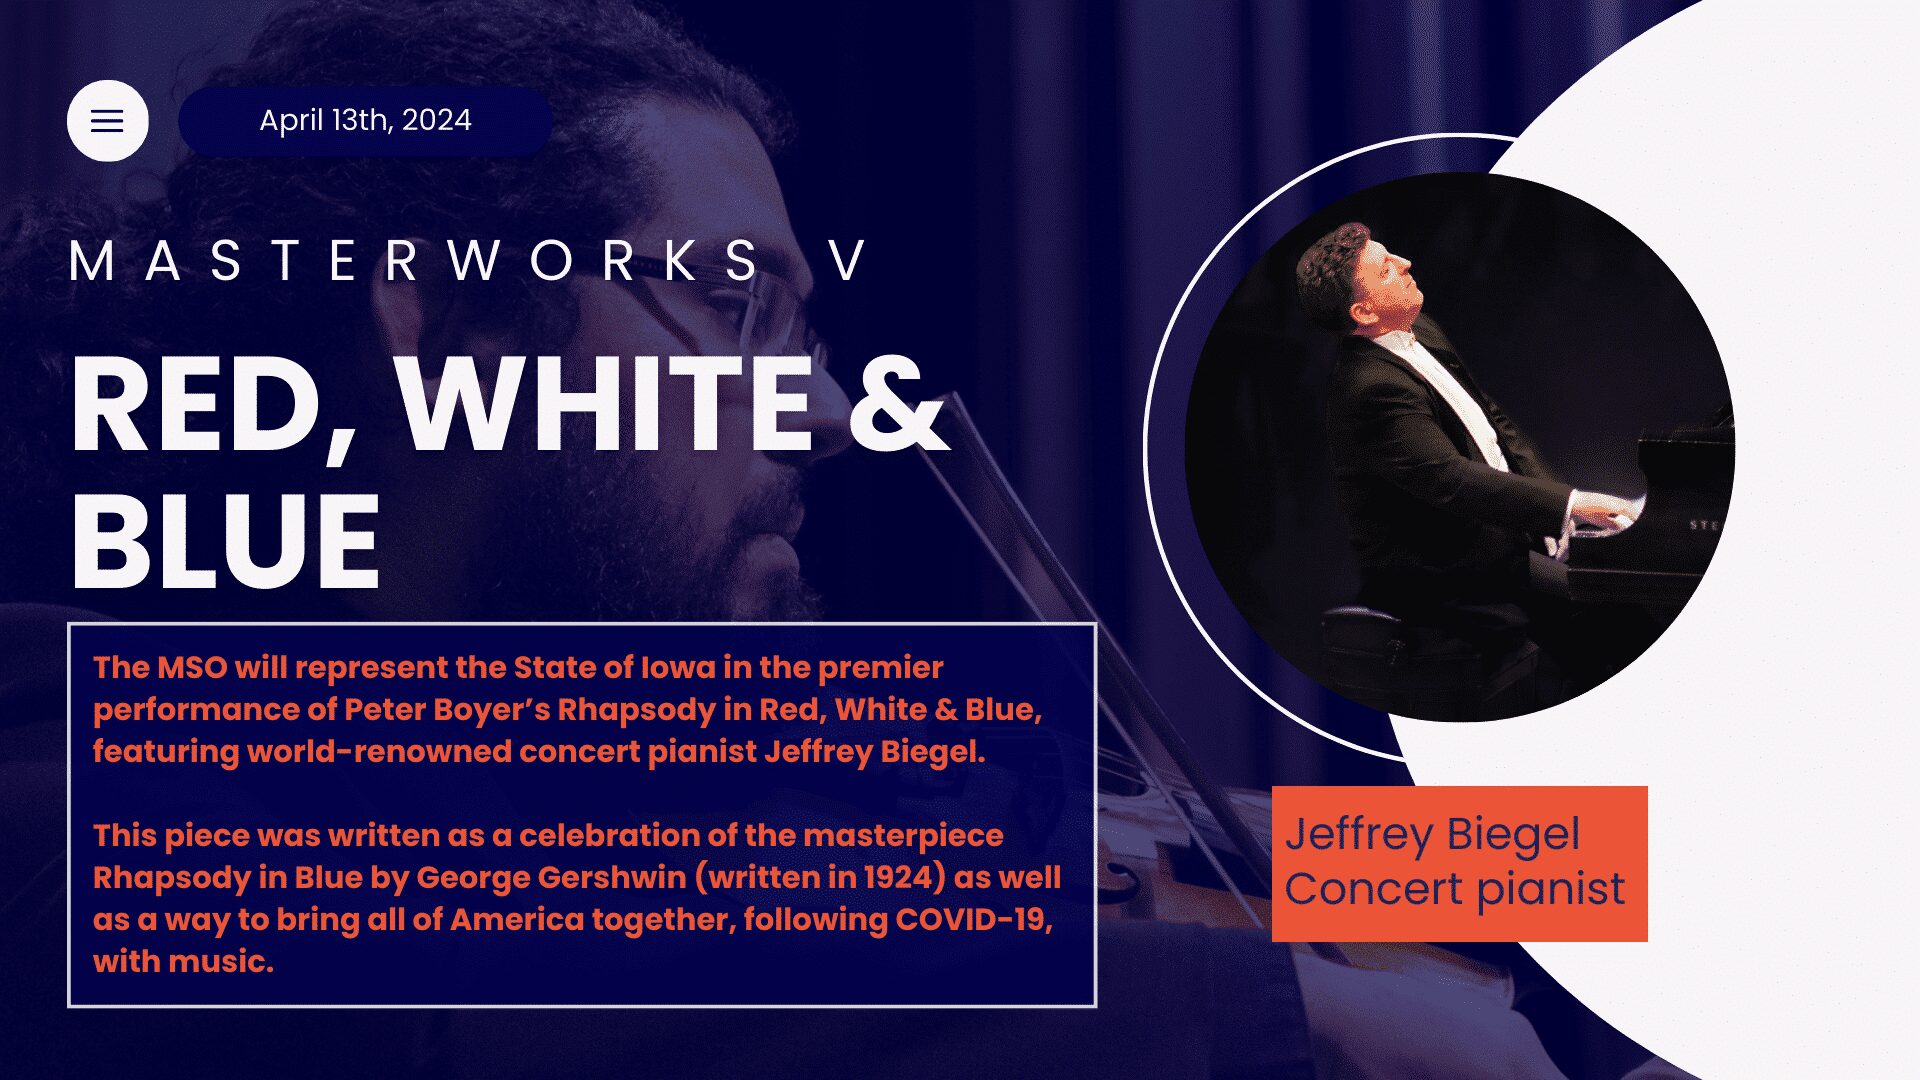 Muscatine Symphony Orchestra Presents “Red, White, and Blue” Concert Featuring Renowned Pianist Jeffrey Biegel